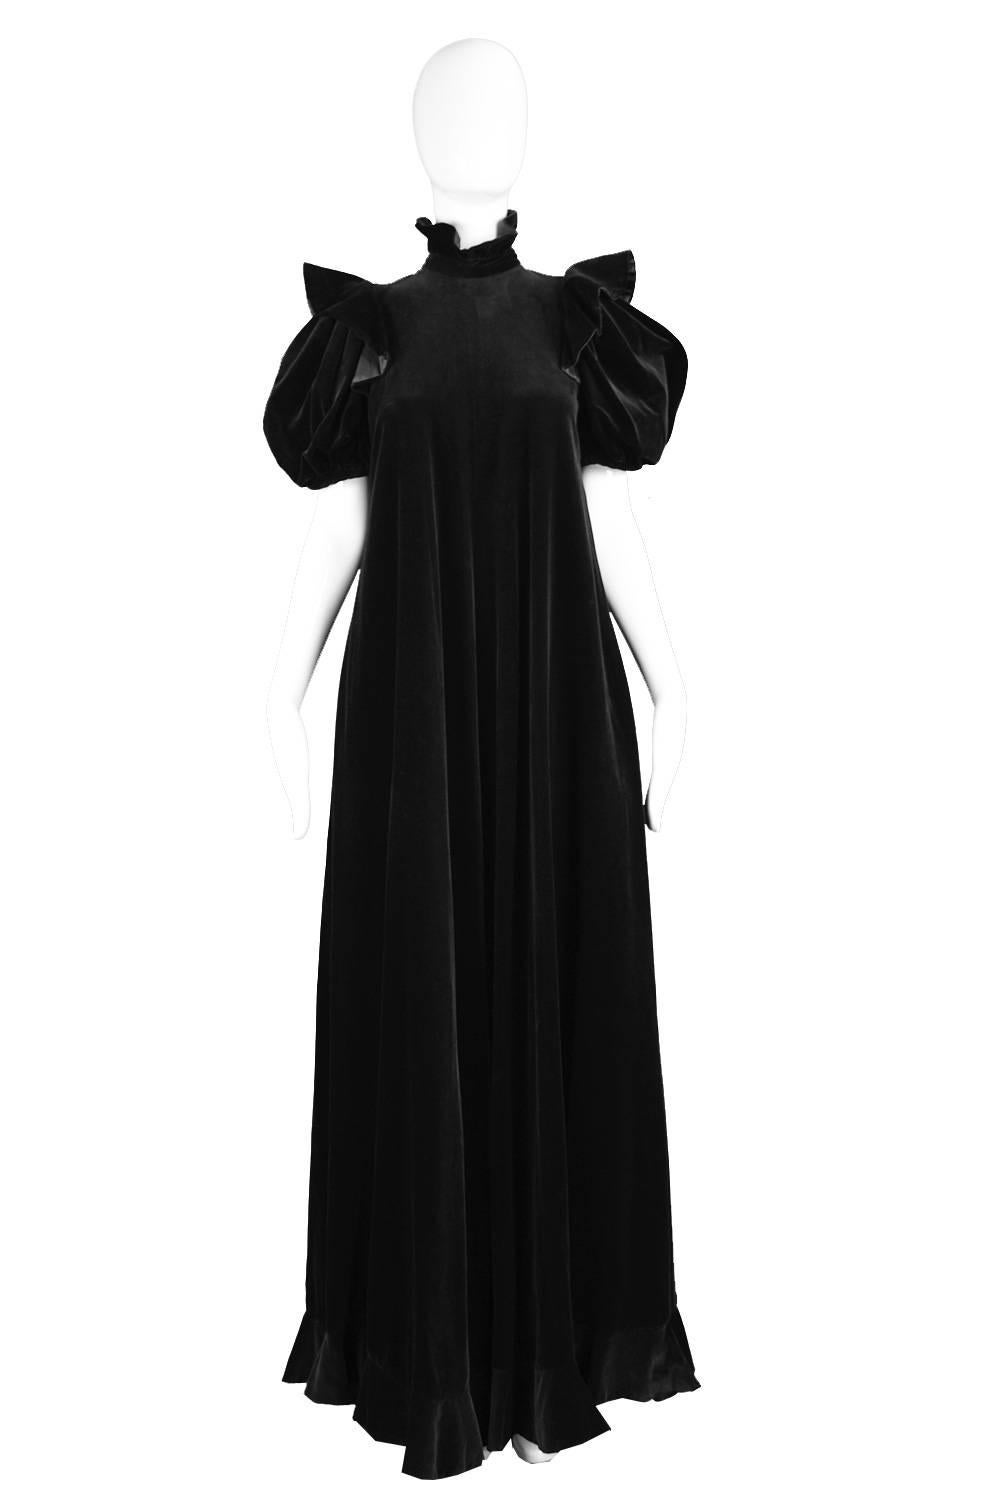 An incredible vintage black velvet gown from the 1970s by iconic British designer, Gina Fratini - a contemporary of and arguably an equal to Ossie Clark and Thea Porter. 

Estimated Size: UK 8-10/ US 4-6/ EU 36-38 
Bust - 34” / 86cm
Waist -